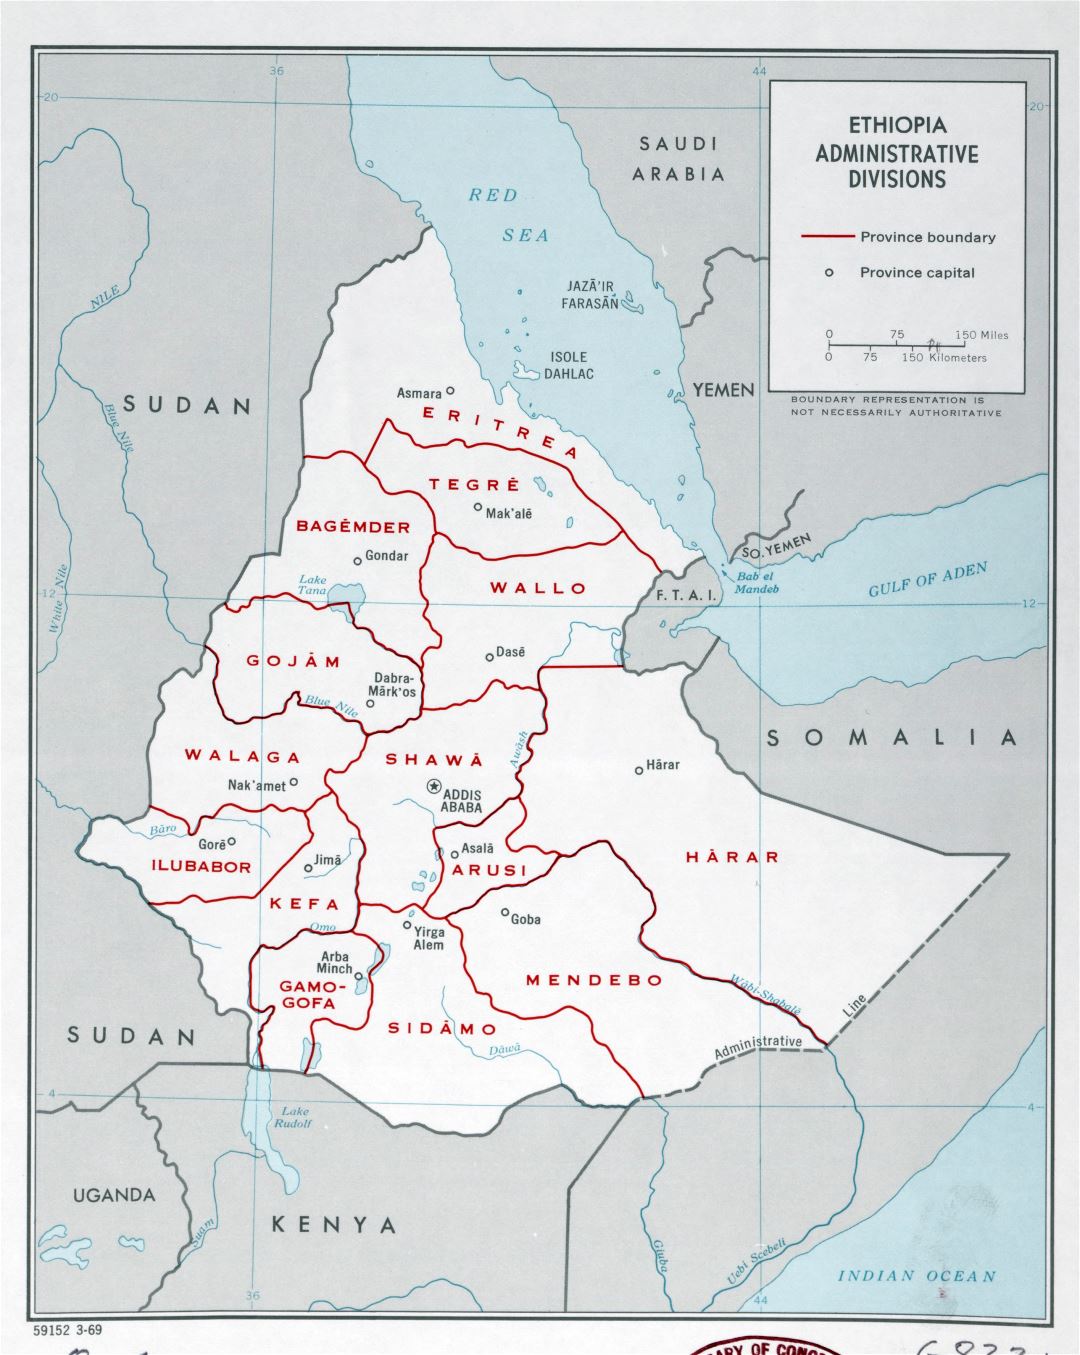 Large detailed administrative divisions map of Ethiopia - 1969